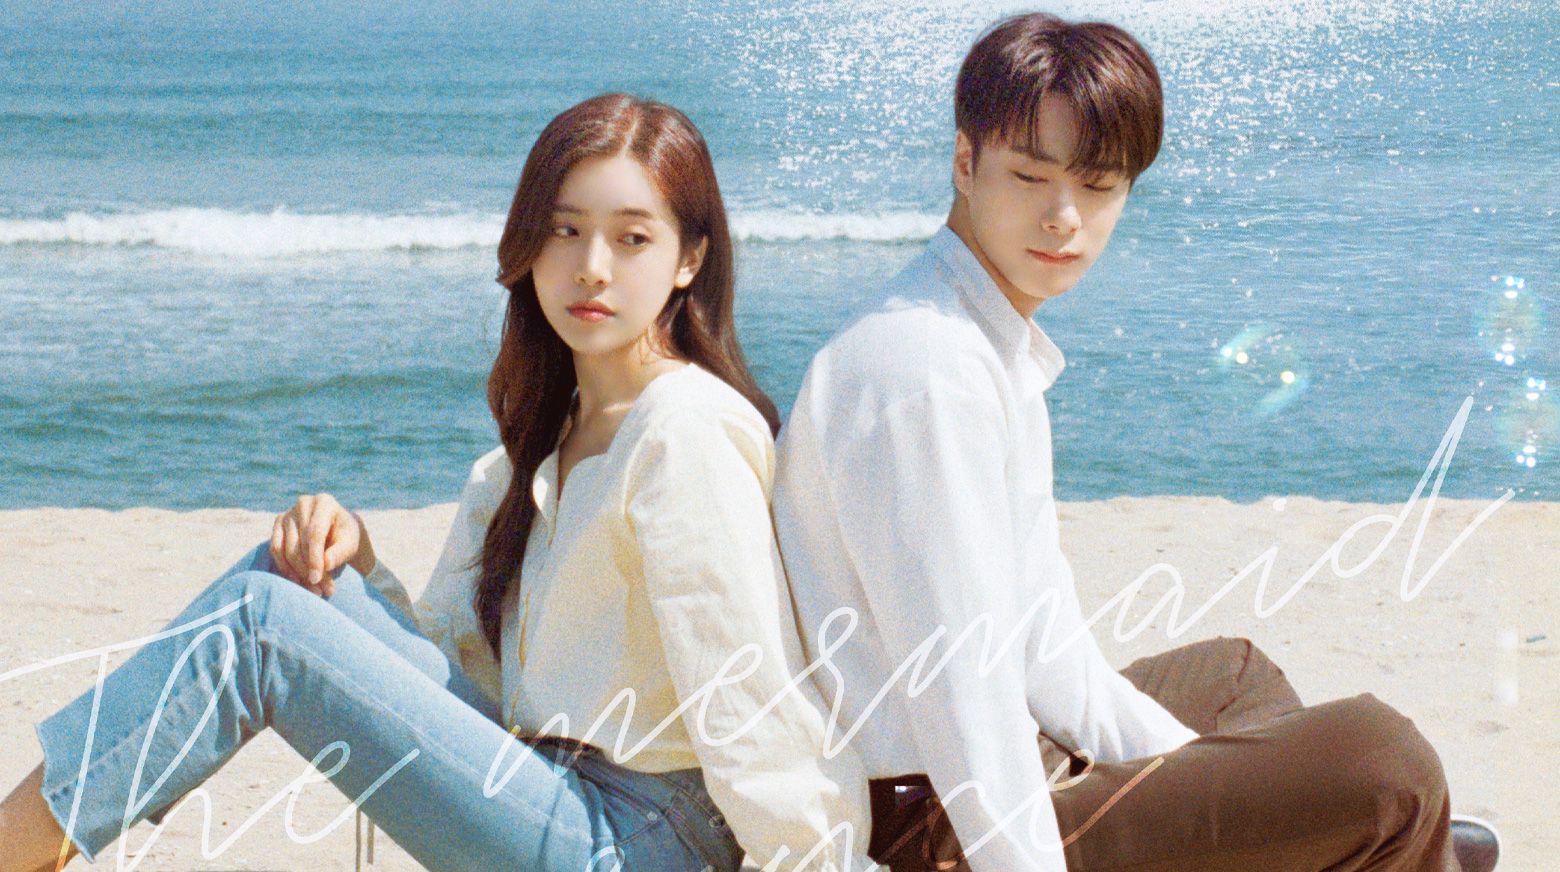 How to Watch the Mermaid Prince KDrama?